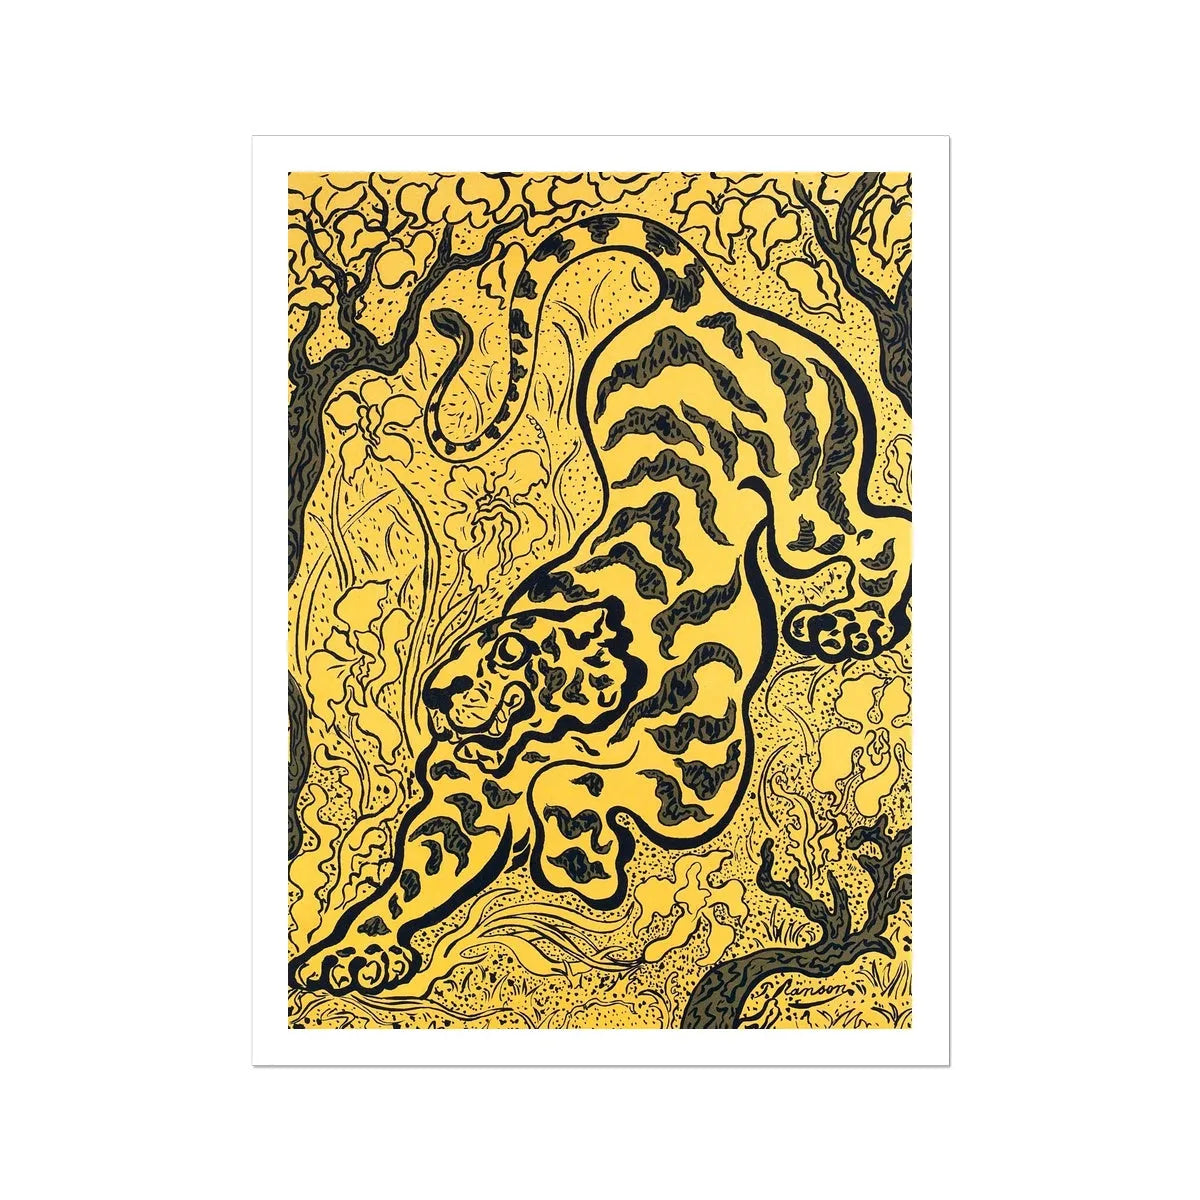 Tiger In The Jungle By Paul Ranson Fine Art Print - 24’x32’ - Posters Prints & Visual Artwork - Aesthetic Art